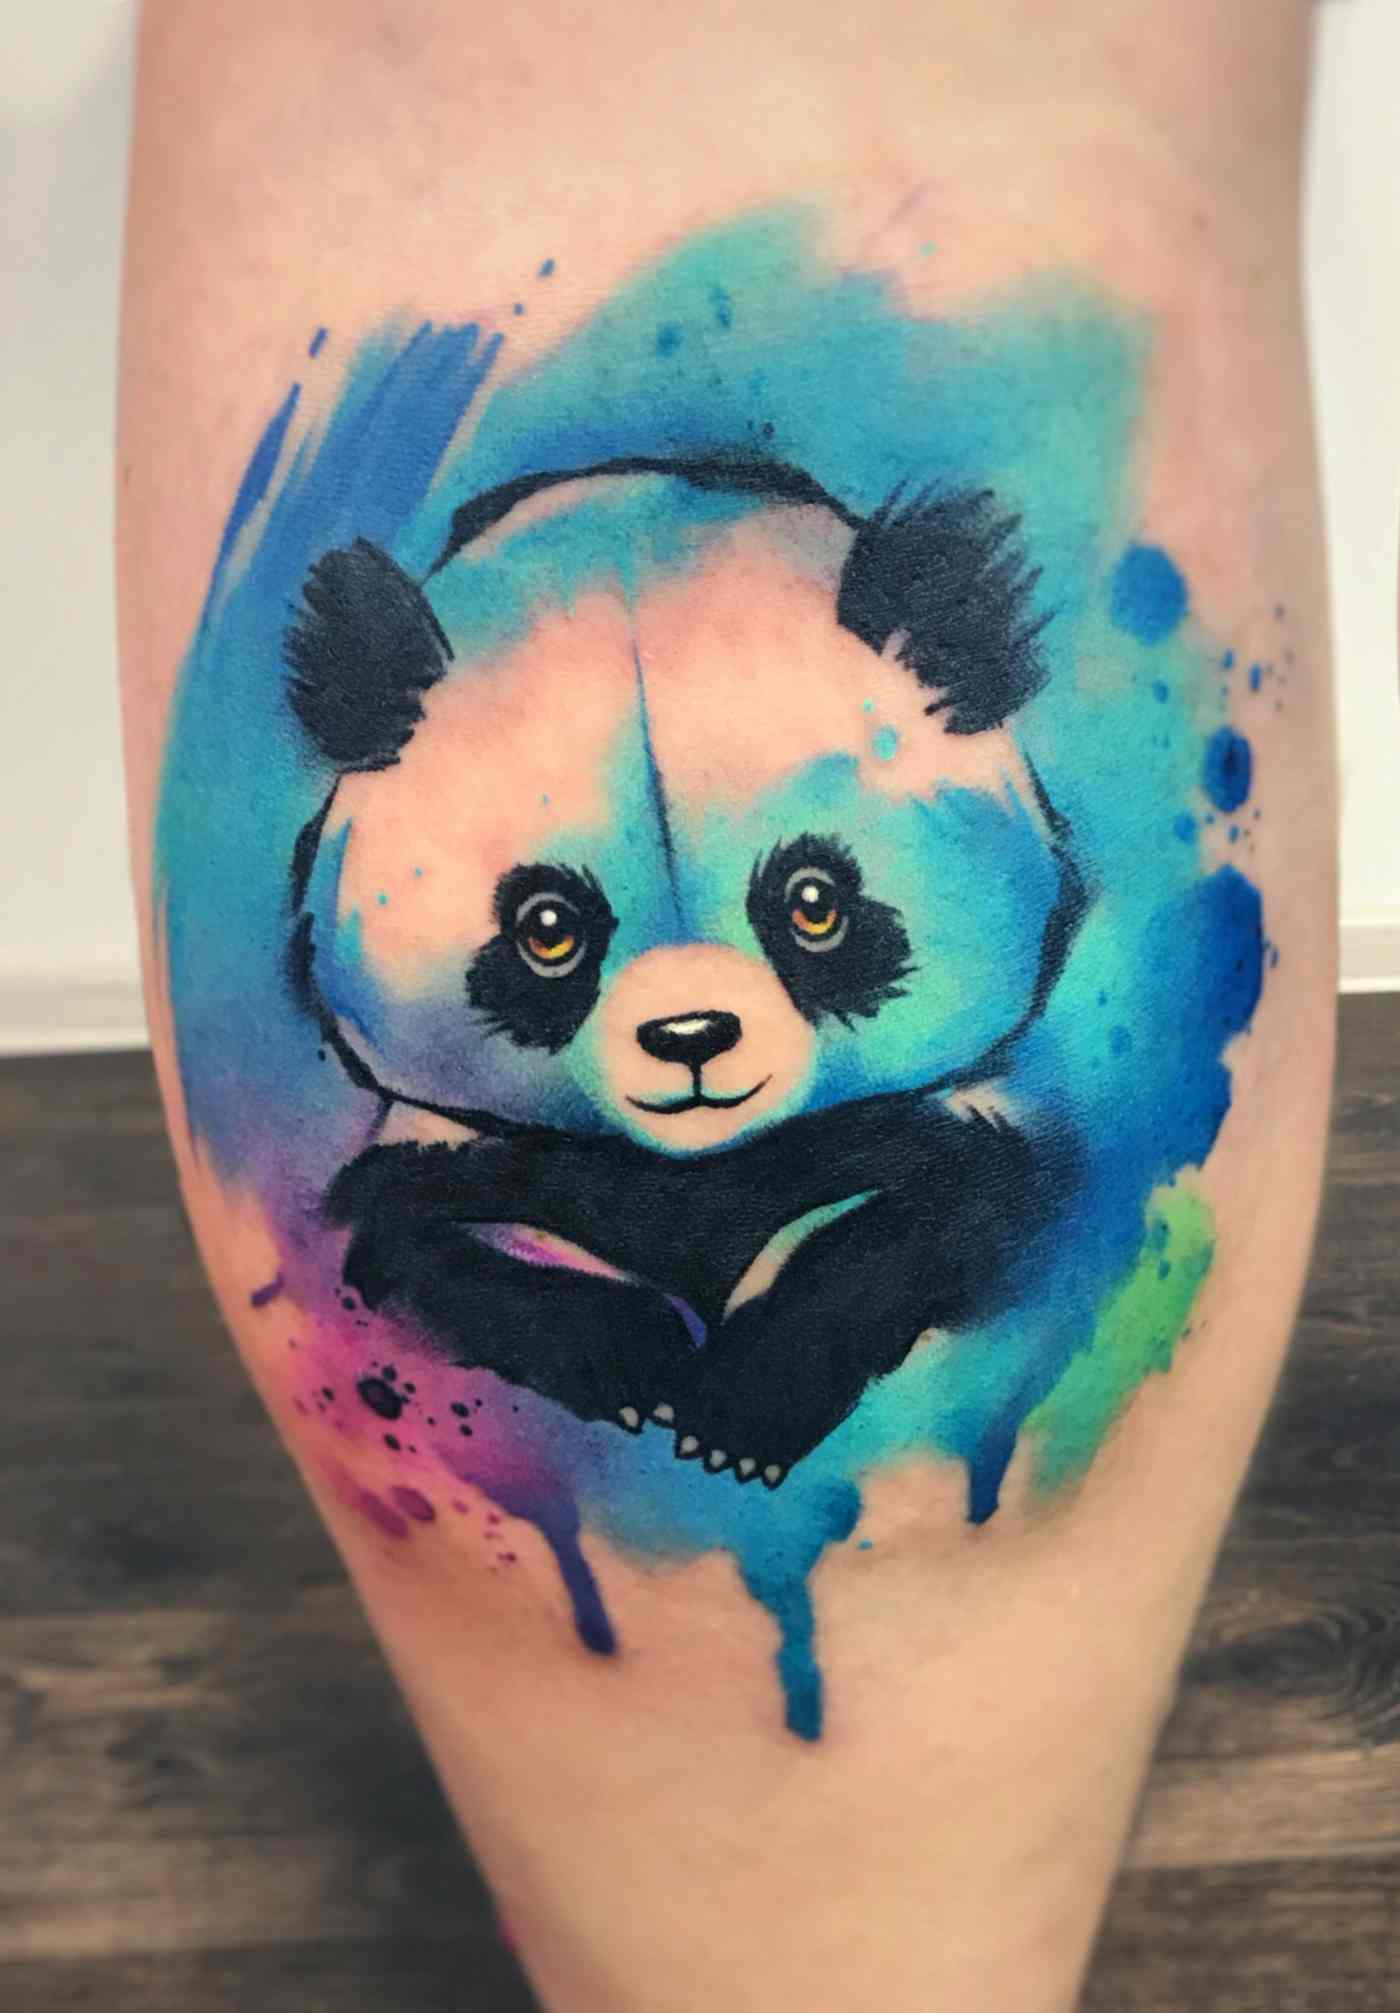 Wading Tattoo with attractive panda and watercolor colors in blue, pink, purple and green